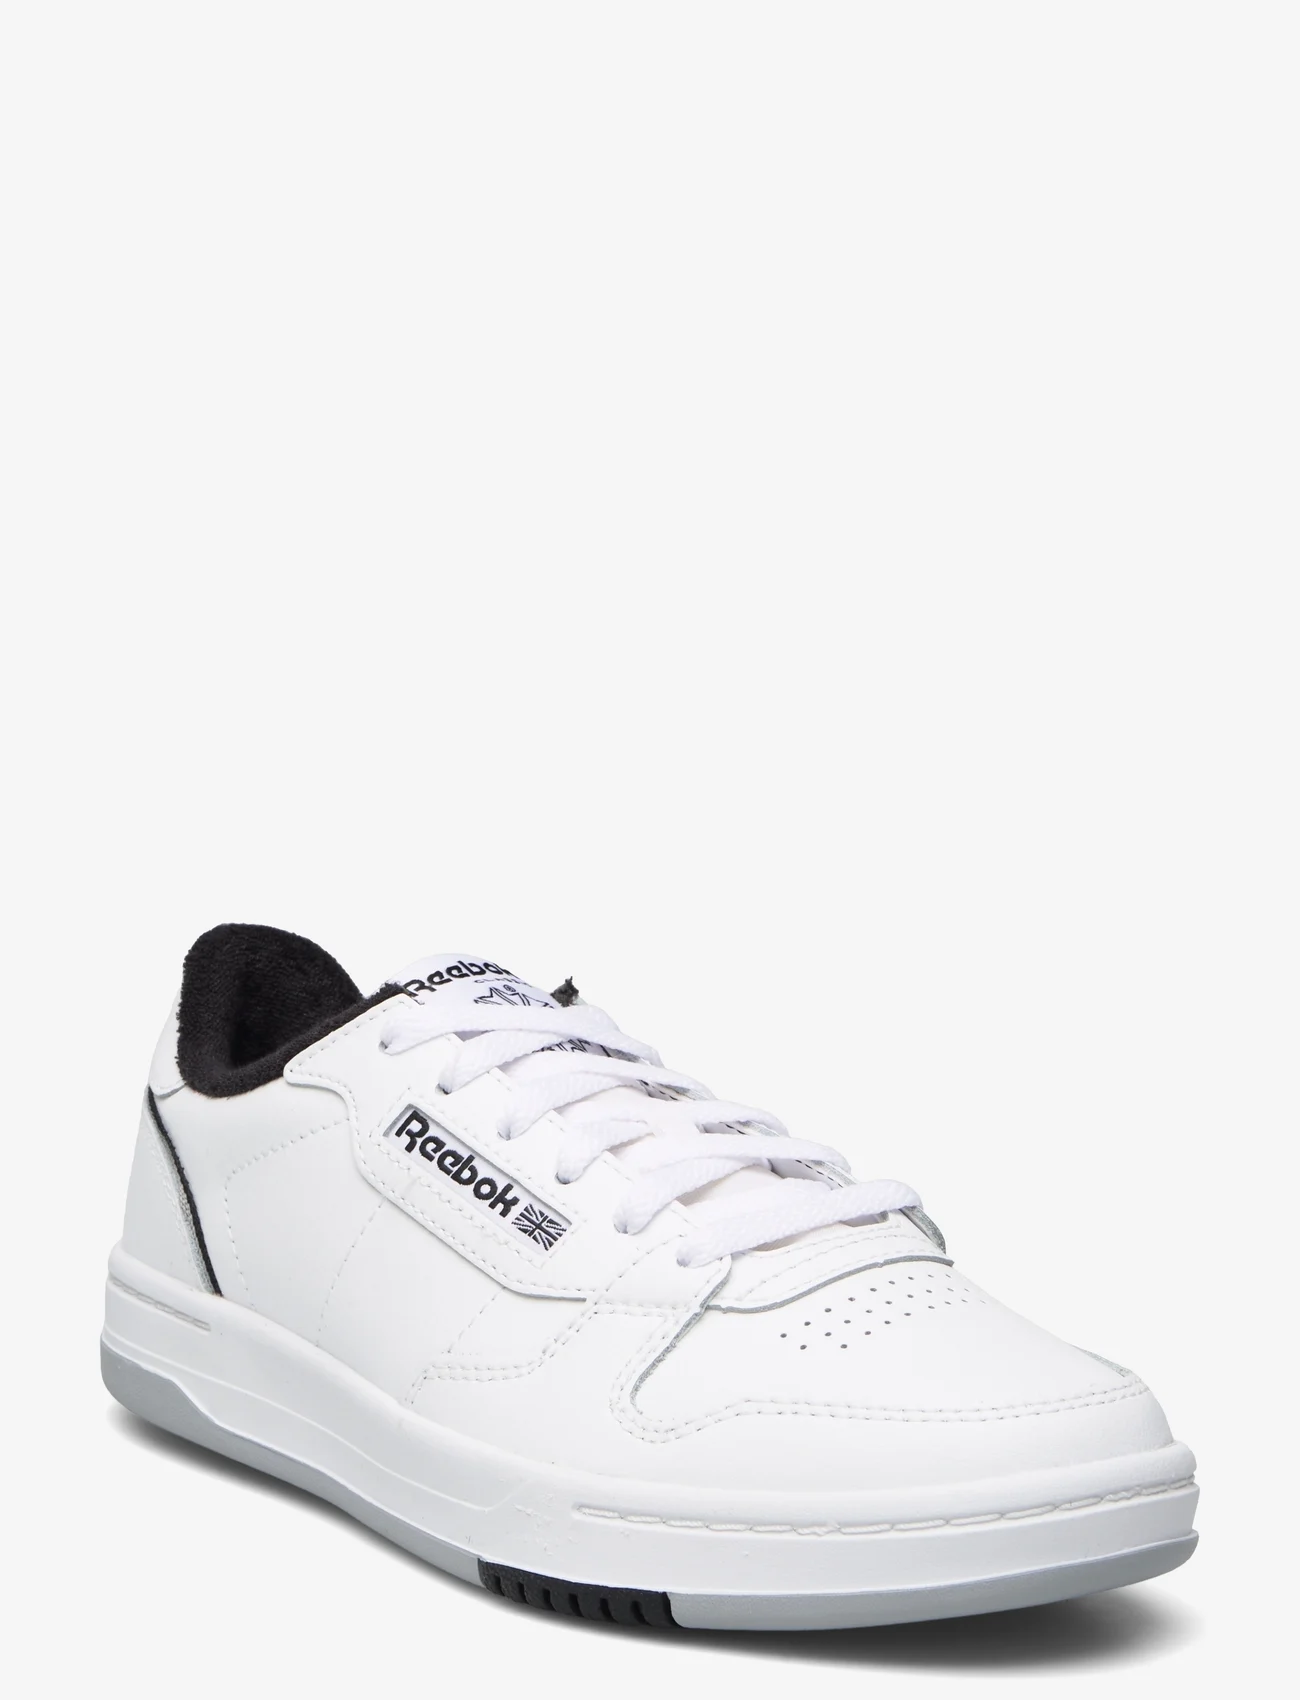 Reebok Classics - PHASE COURT - low top sneakers - wht/pugry4/black - 0